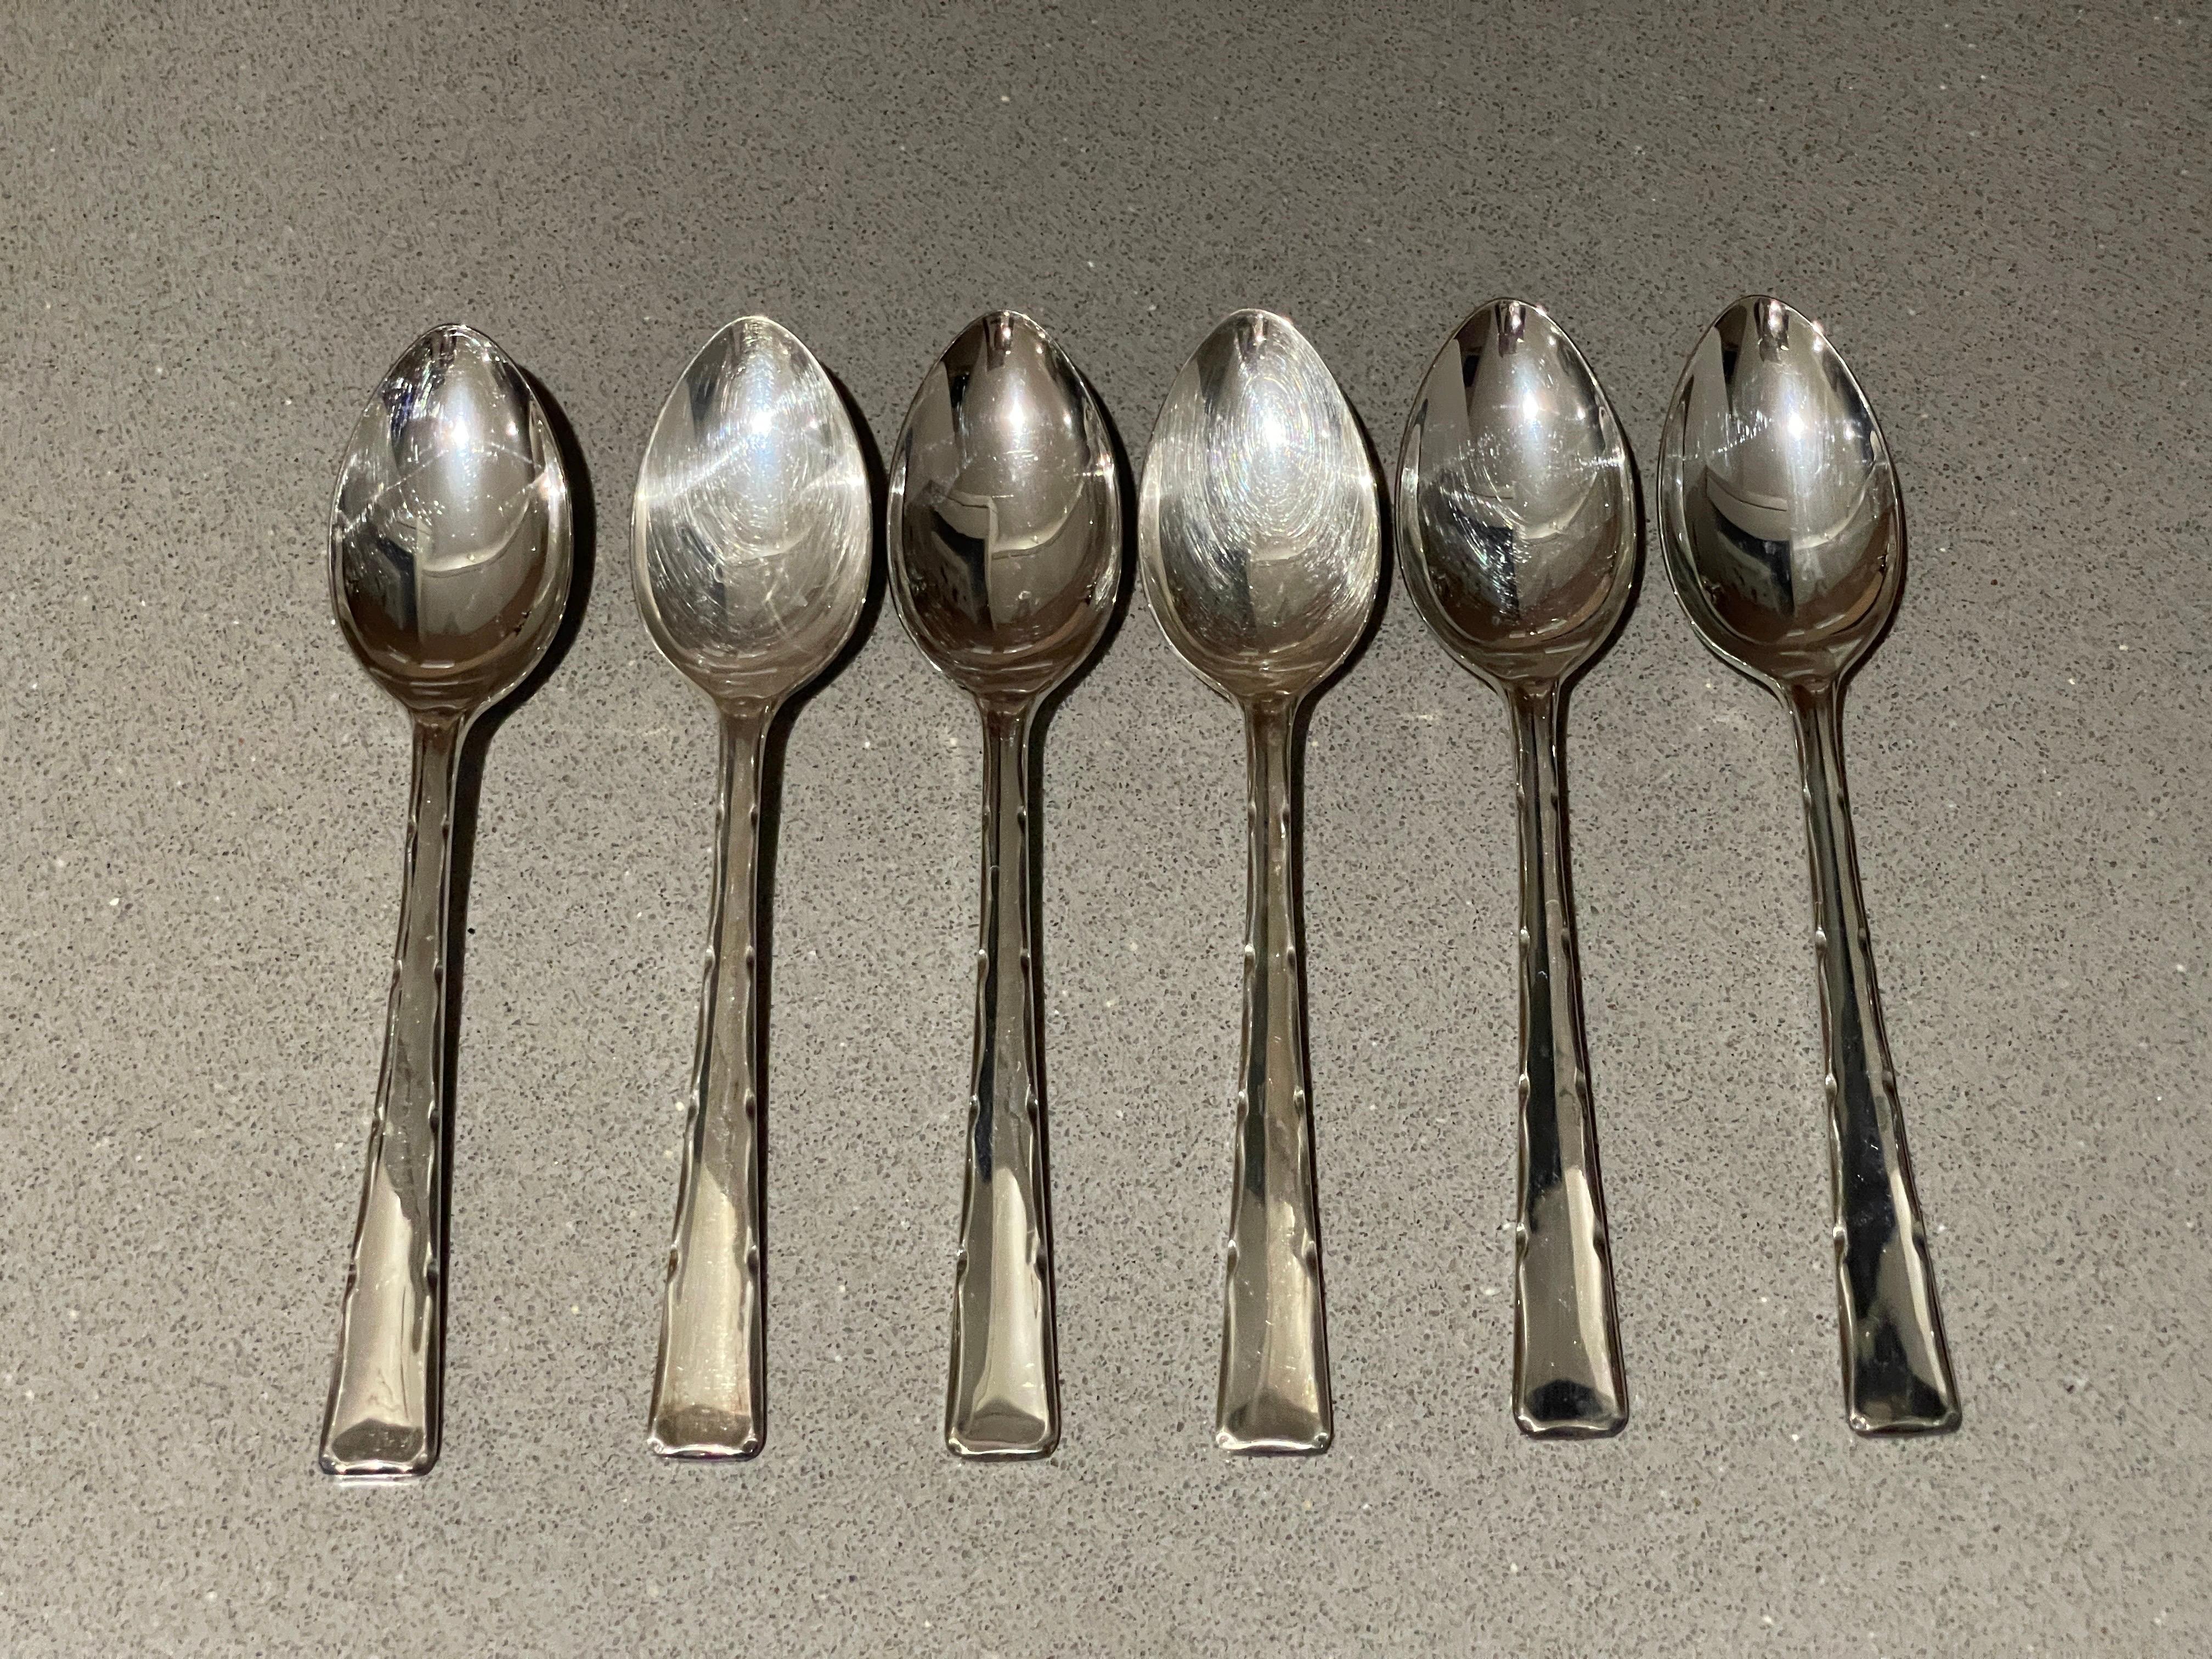 Silvered 25 Antique Spoon English Silver Demitasse Coffee Tea Spoons 4 Set of 6 For Sale